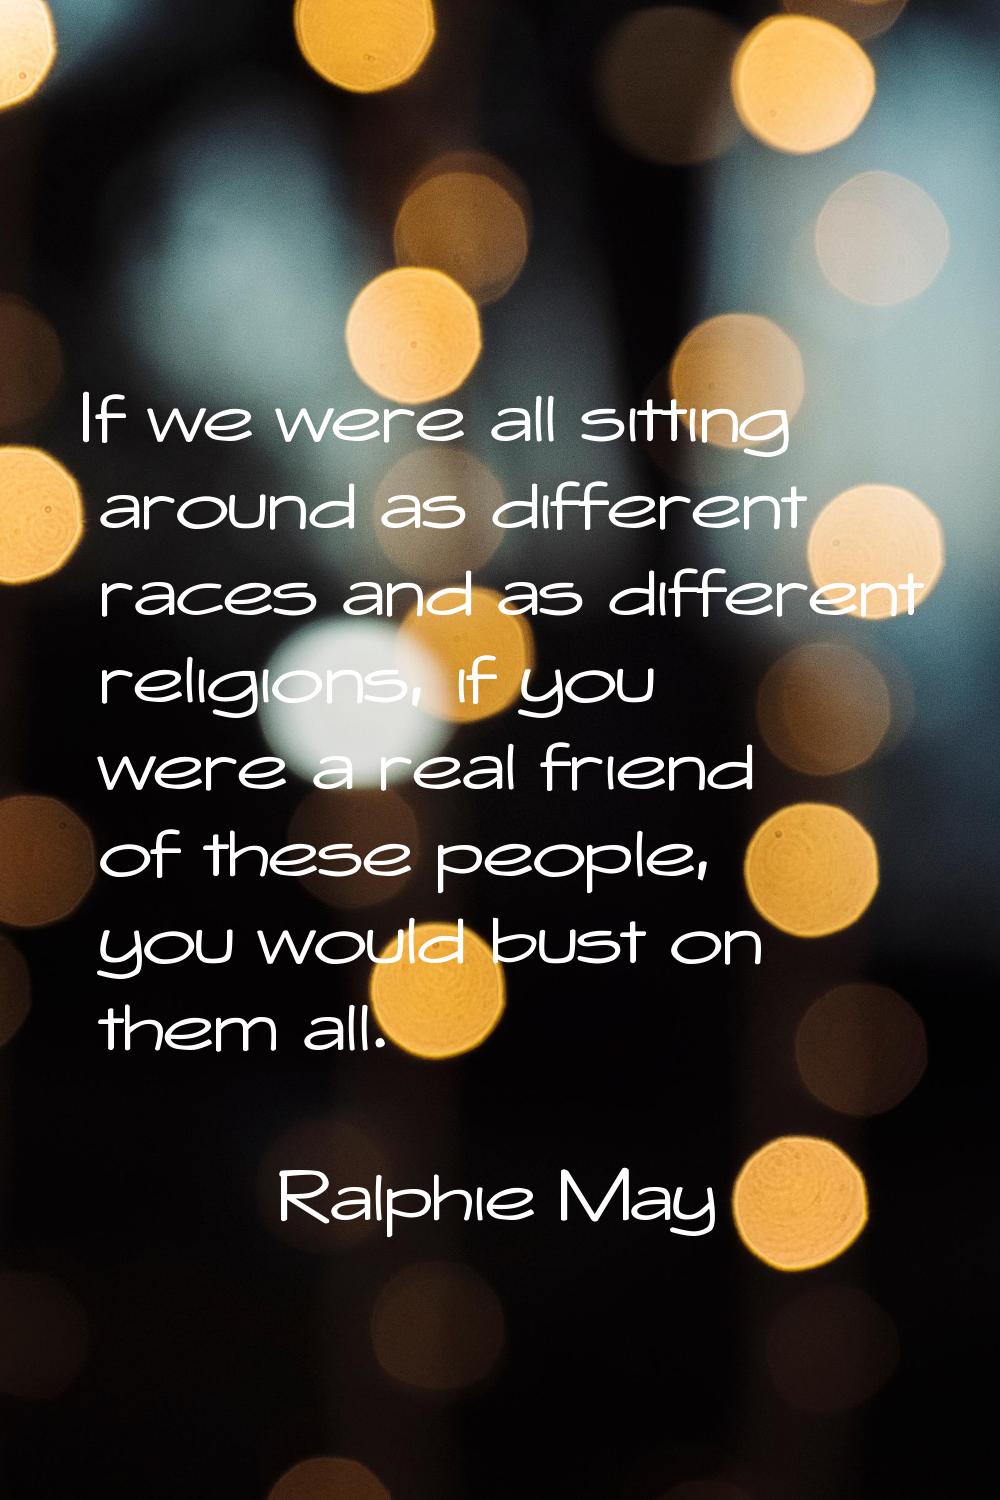 If we were all sitting around as different races and as different religions, if you were a real fri